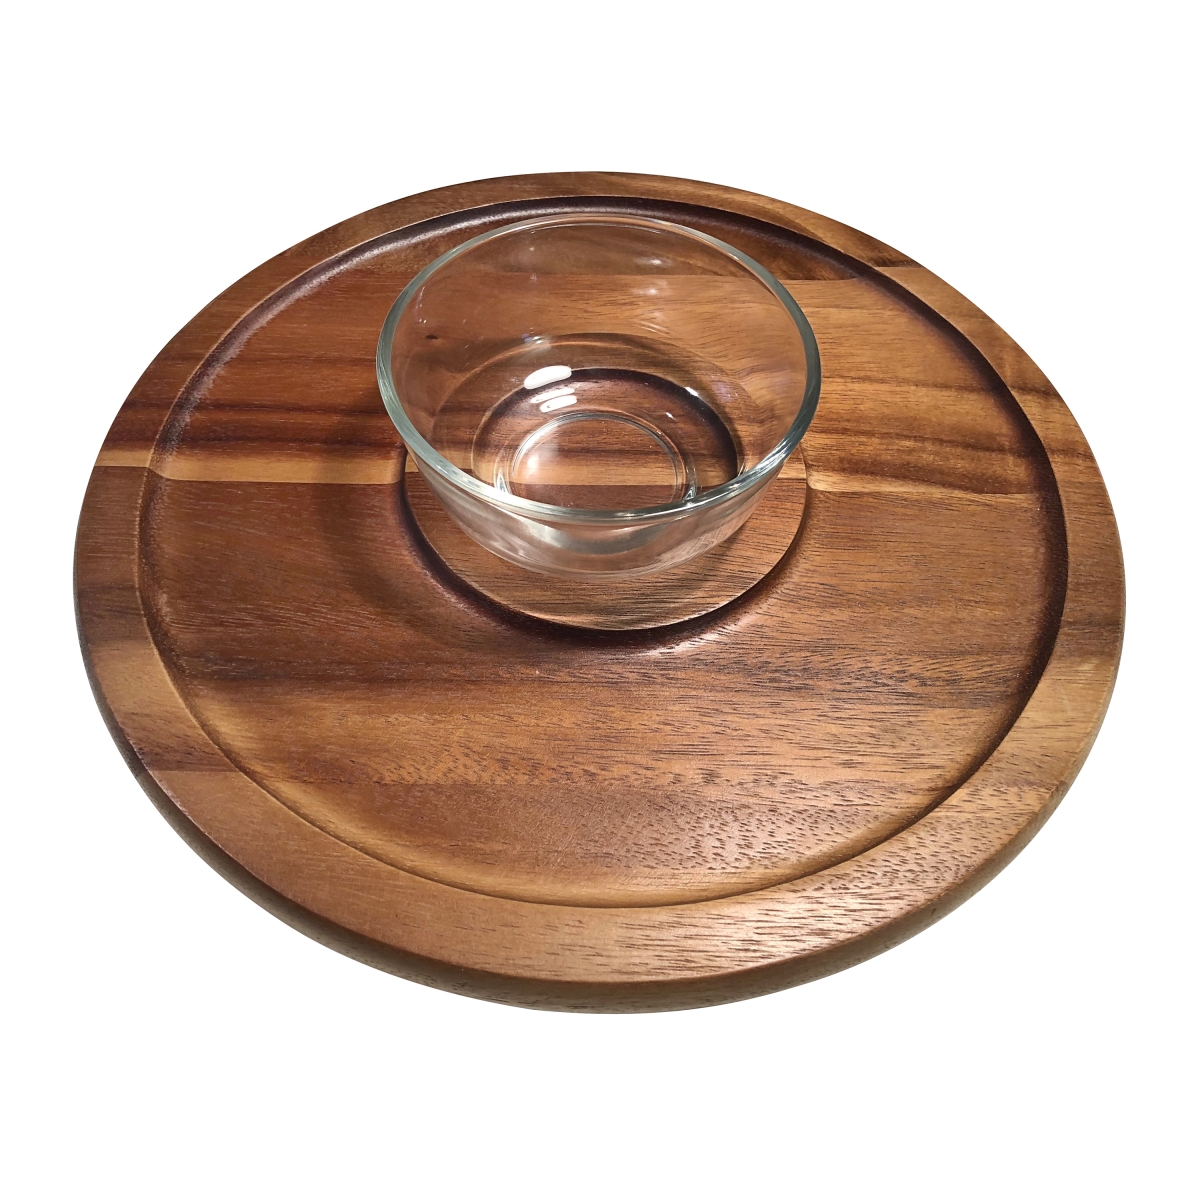 322g 12 Dia. Chip & Dip Serving Tray With Glass Bowl